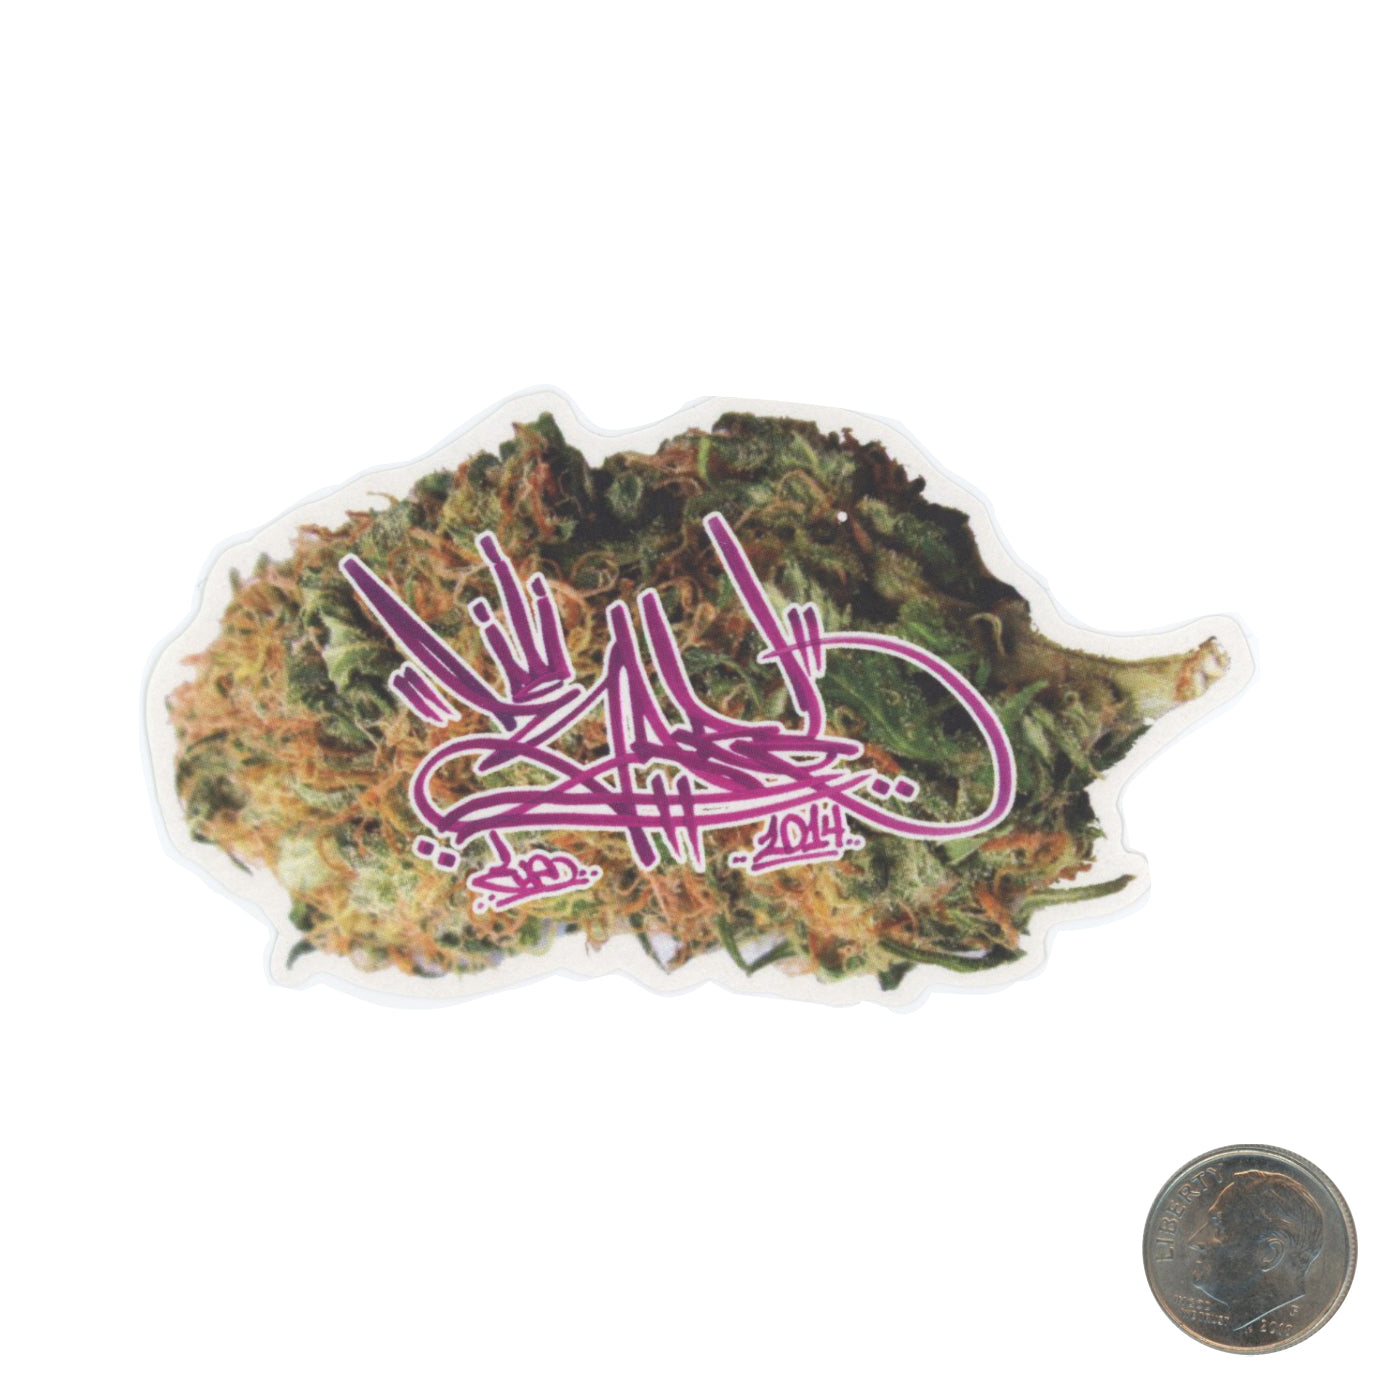 Bareone Cannabis Sticker with dime